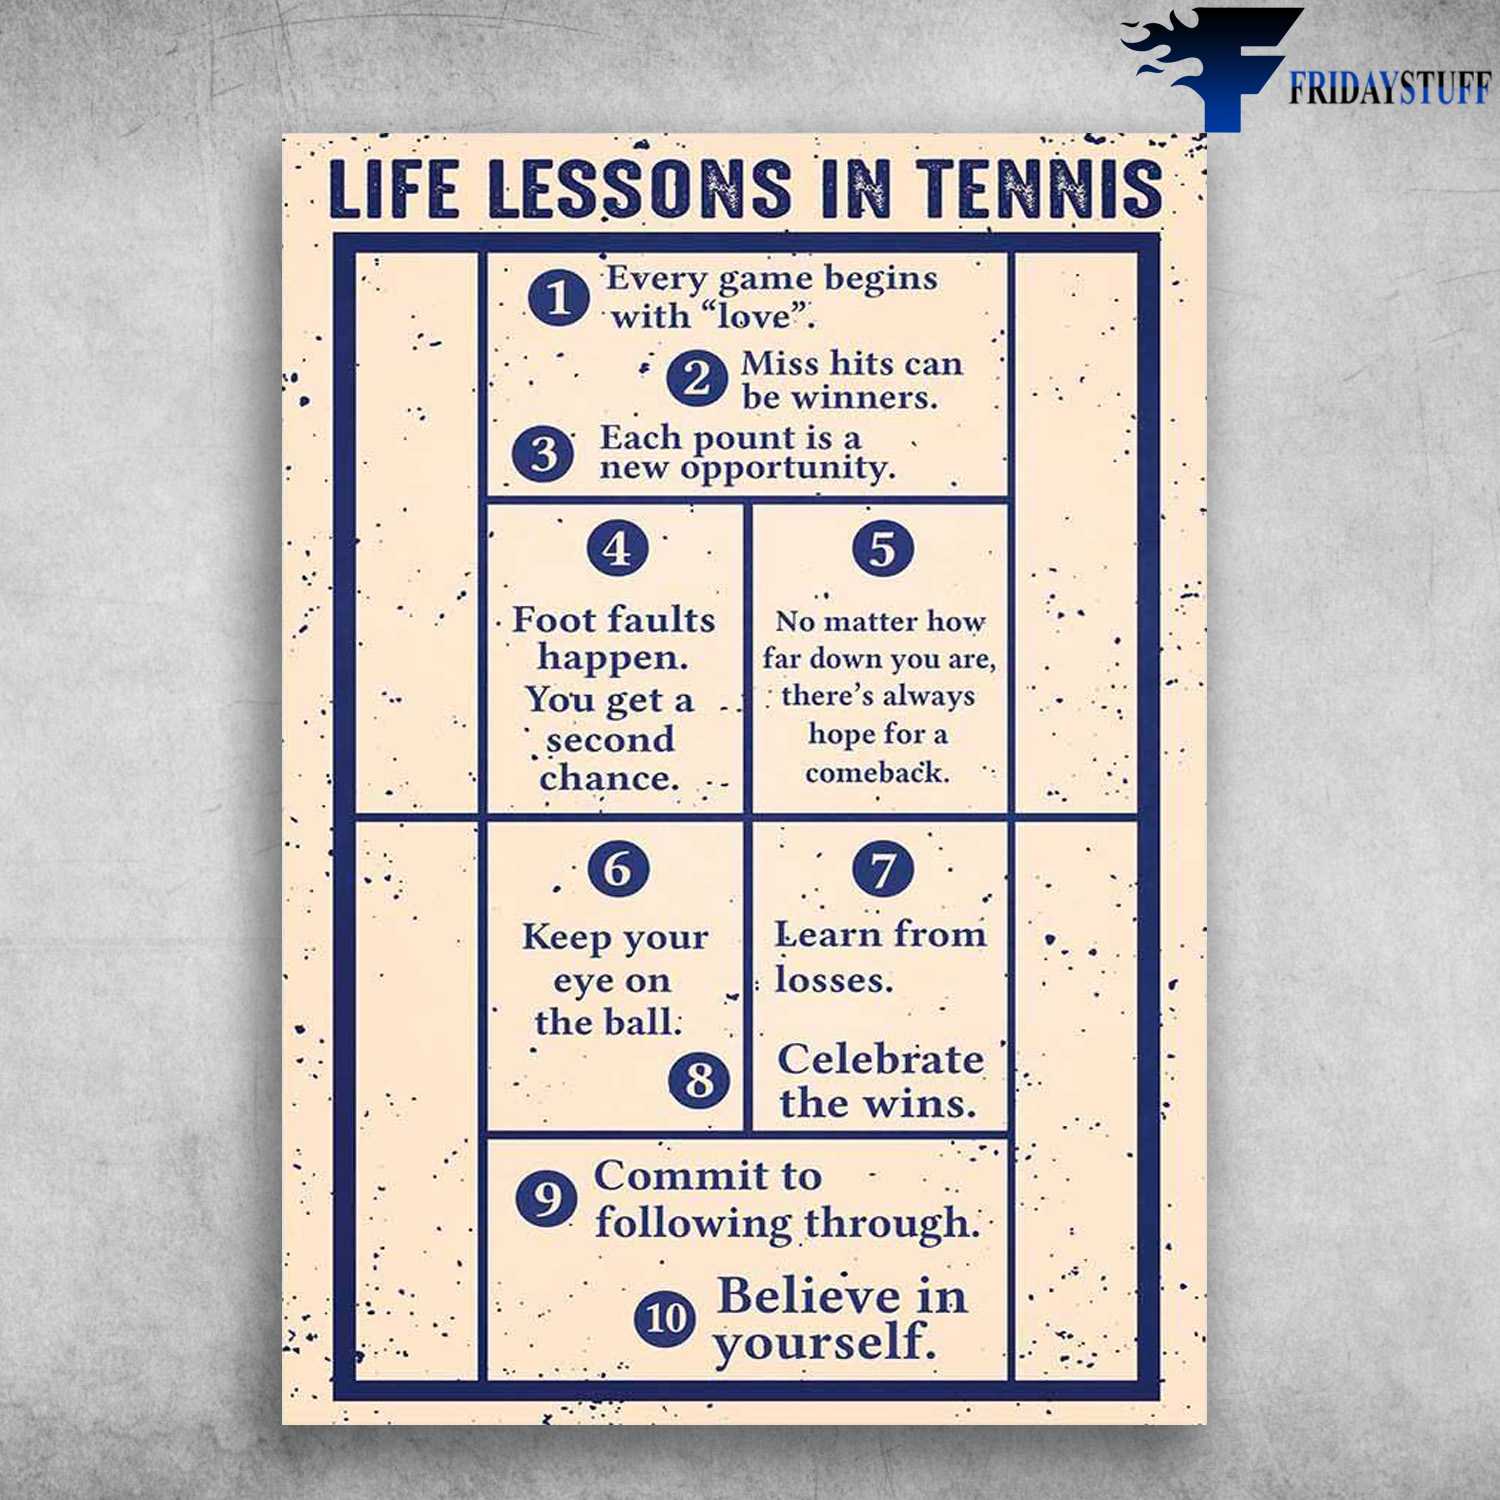 Tennis Poster, Life Lessons In Tennis - Every Game Begins With Love, Miss Hits Can Be Winners